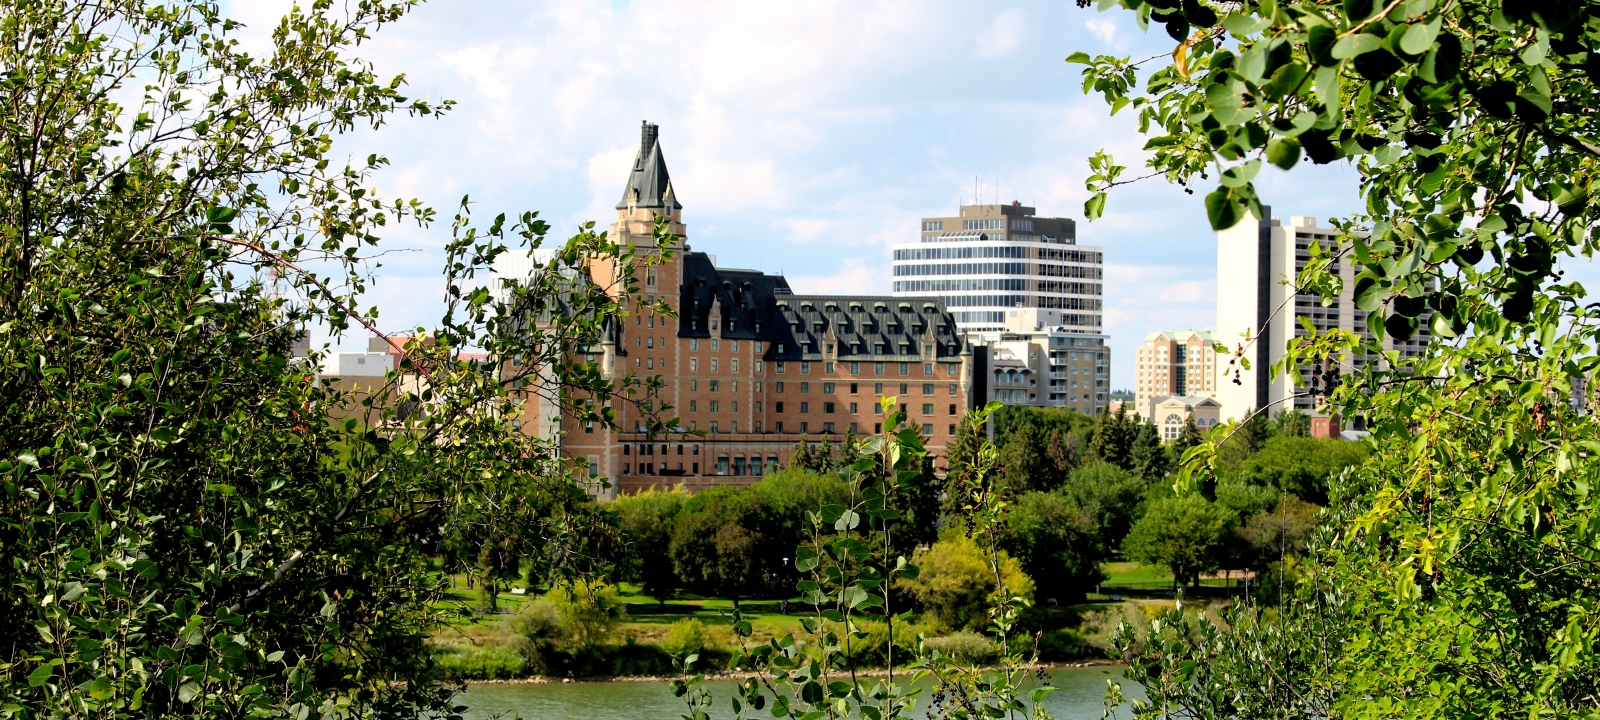 Welcome to Saskatoon — the most charming city on the prairies